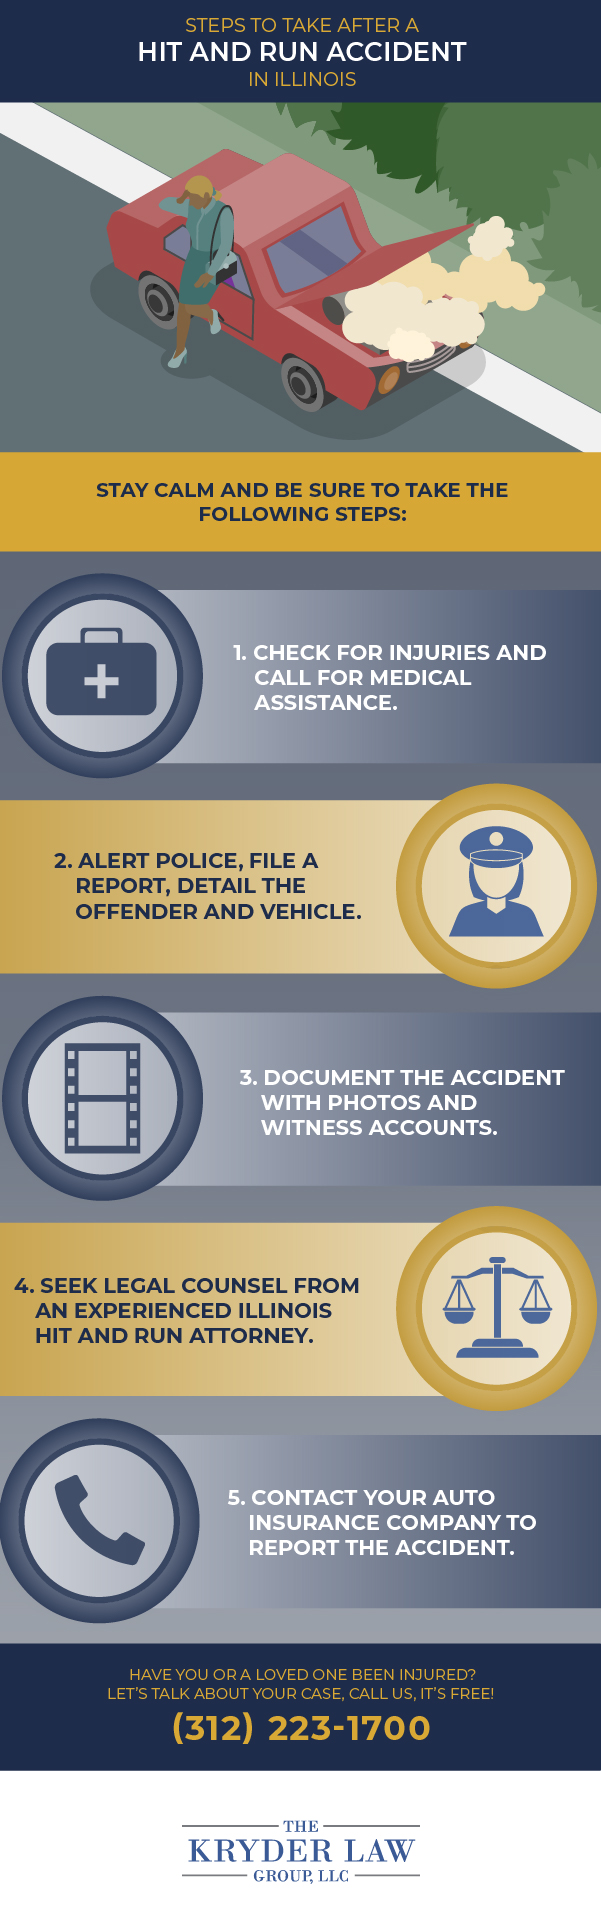 Steps to Take After a Hit and Run Accident in Illinois